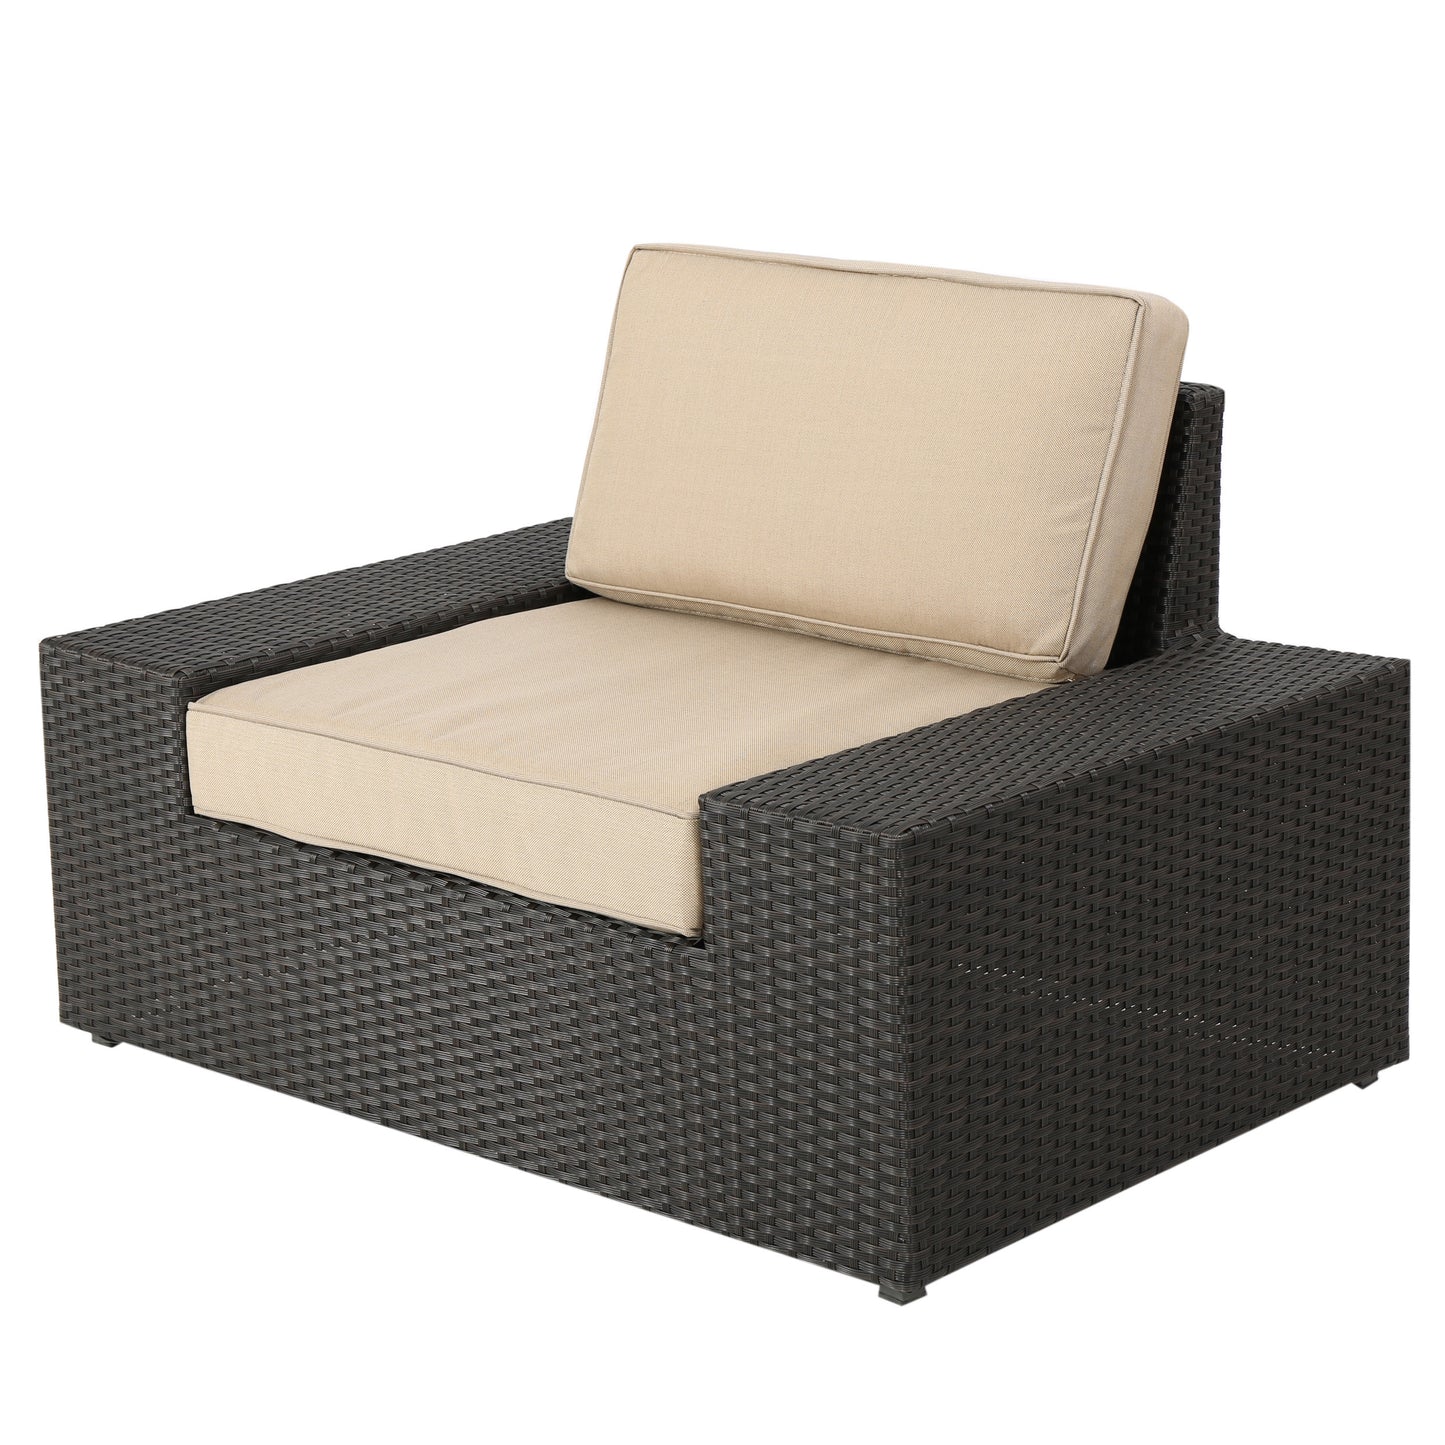 Felicity Outdoor Wicker Club Chair with Cushions